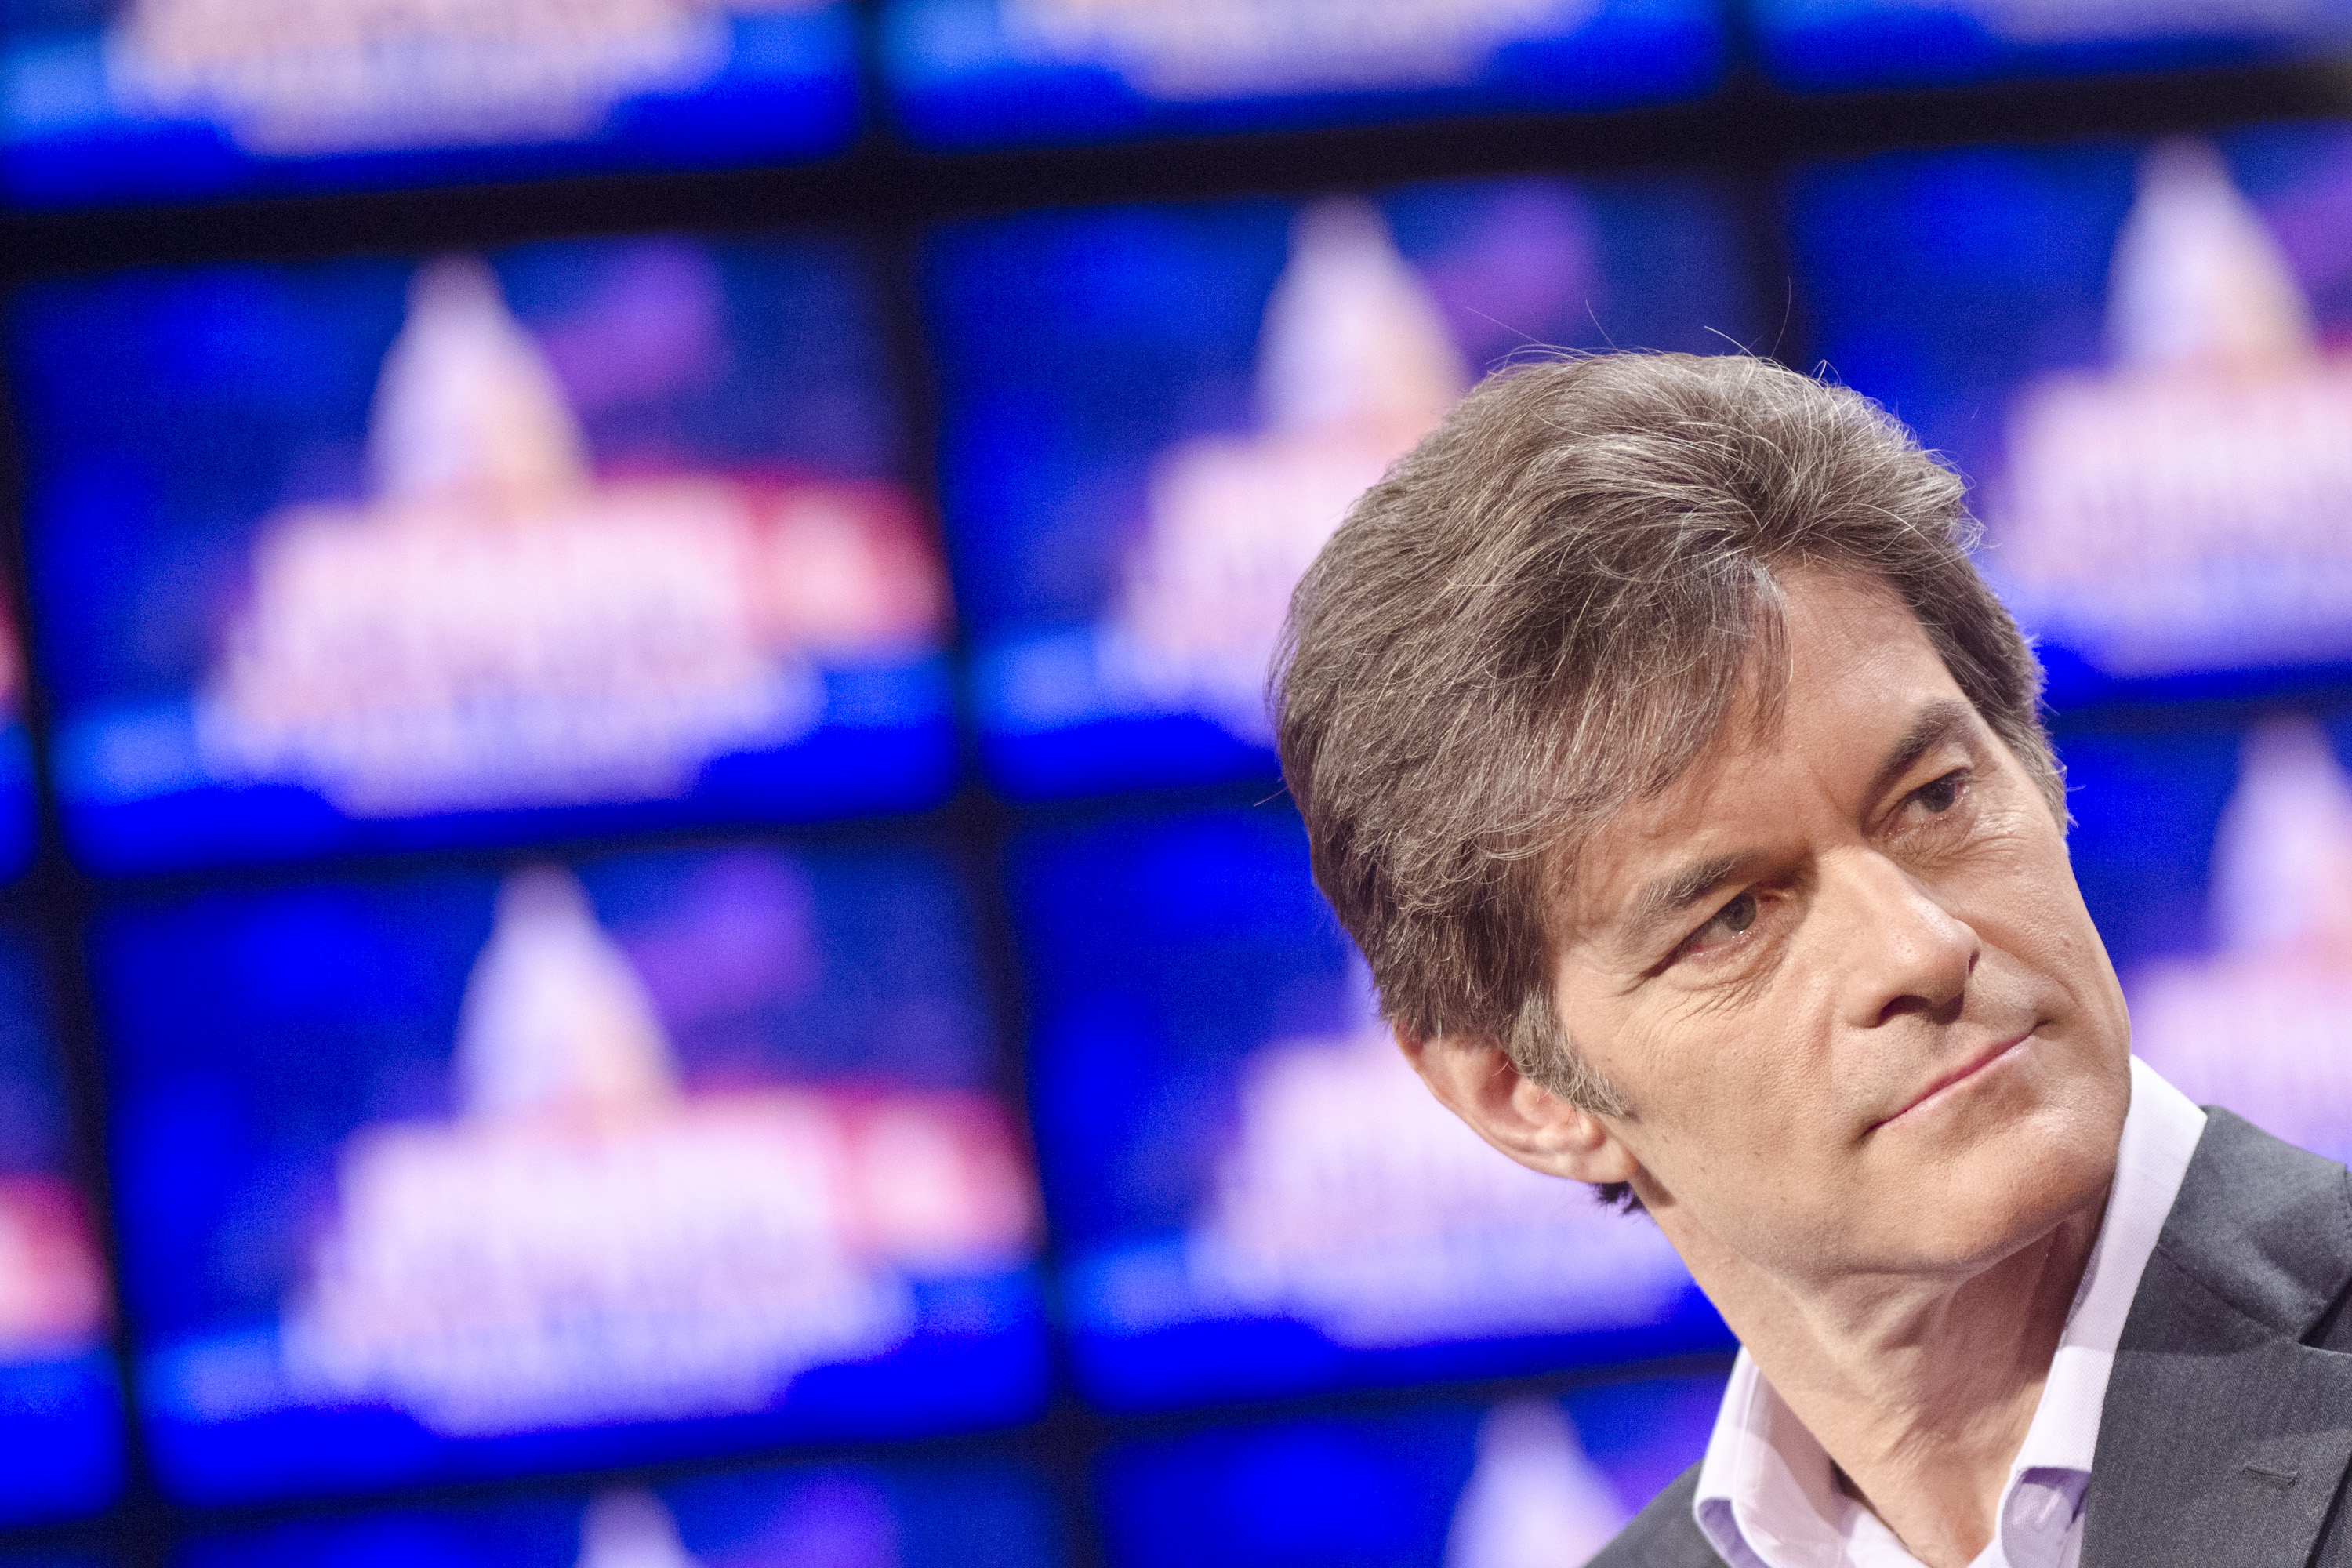 Dr. Oz in profile on the set of 'Jeopardy!'